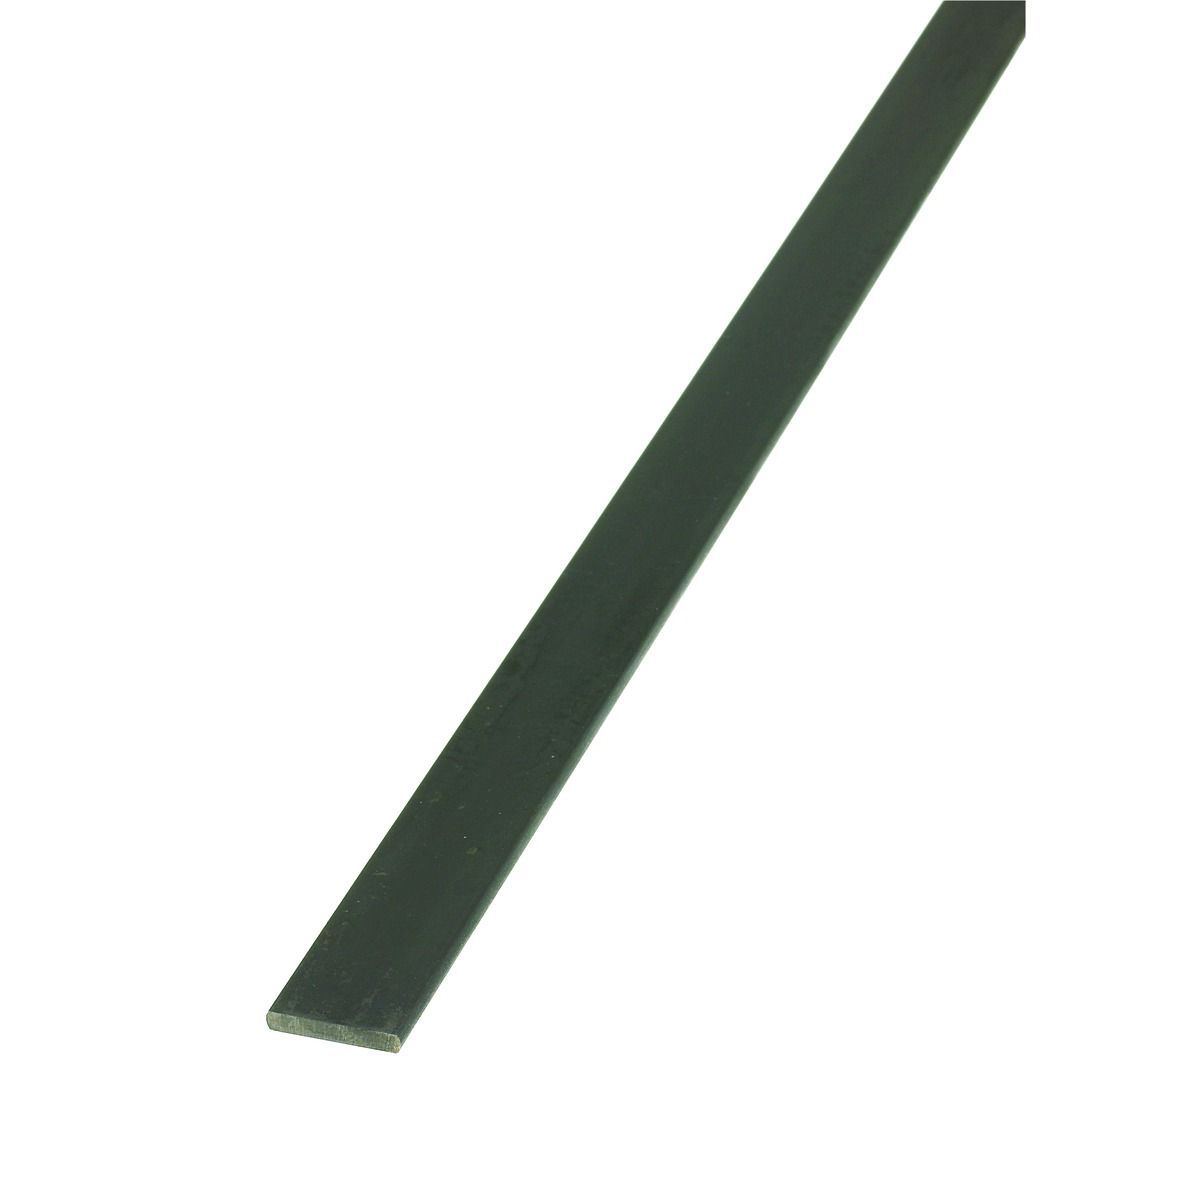 Image of Wickes Multi-Purpose Flat Steel Bar - 1m Length / 4mm Thickness